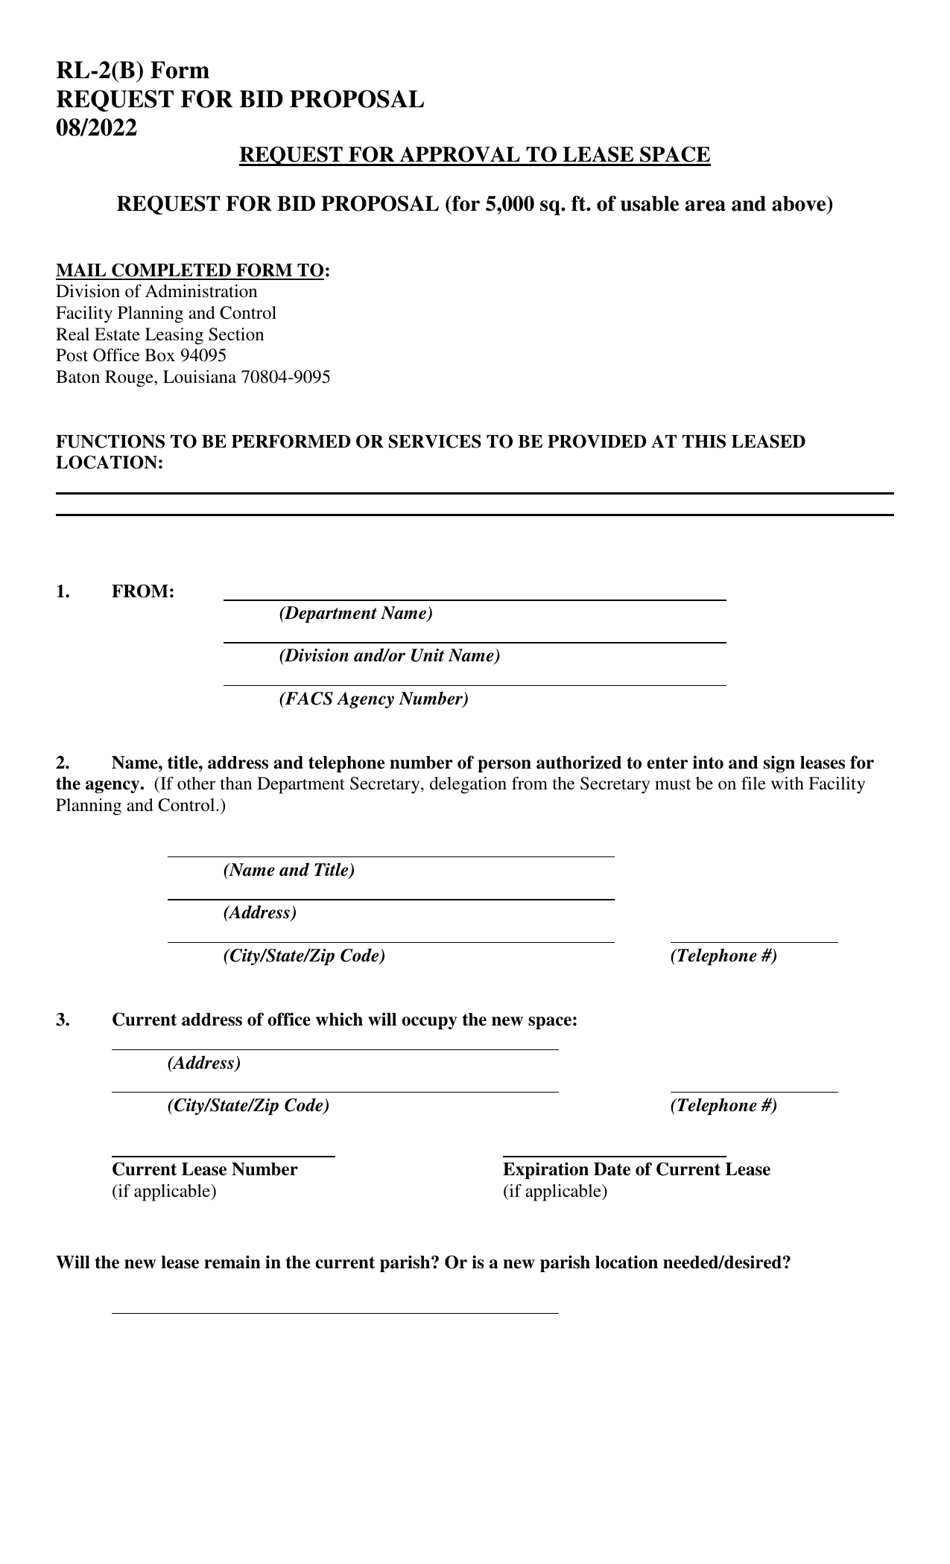 Form RL-2(B) Request for Bid Proposal - Louisiana, Page 1